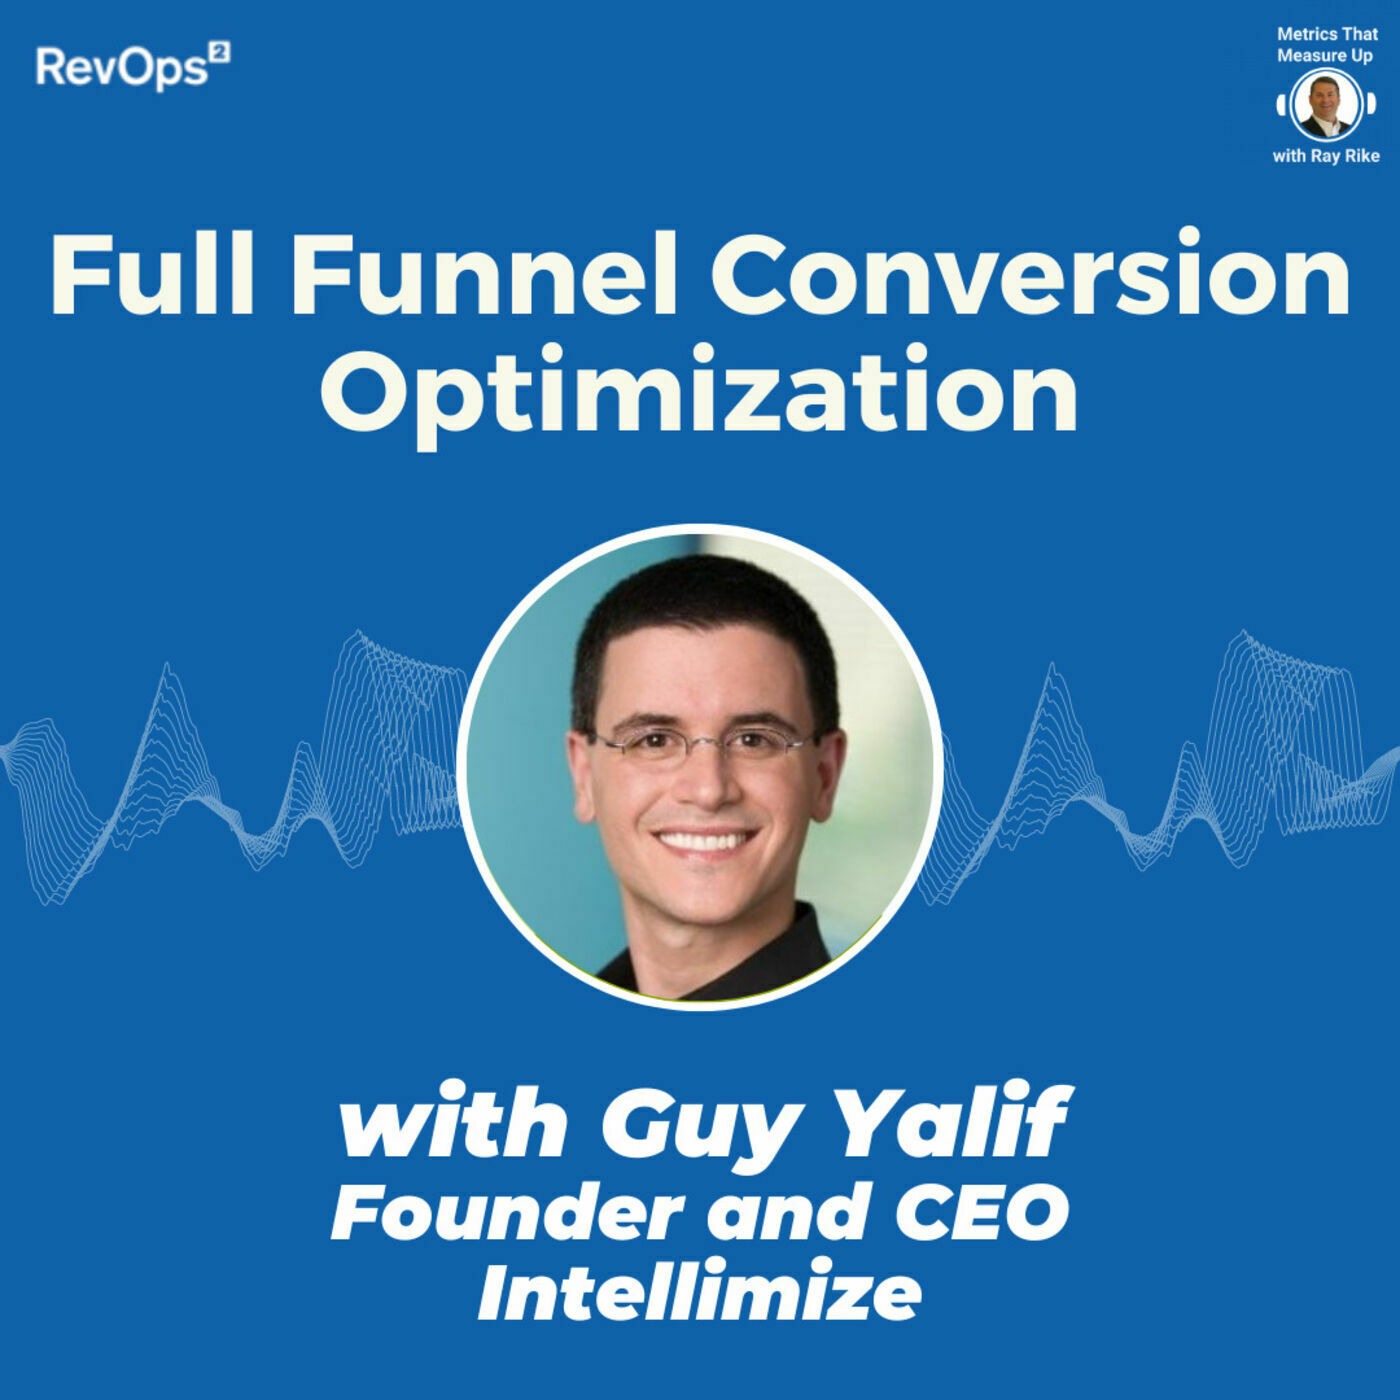 Full Funnel Conversion Optimization - With Guy Yalif, Founder and CEO - Intellimize